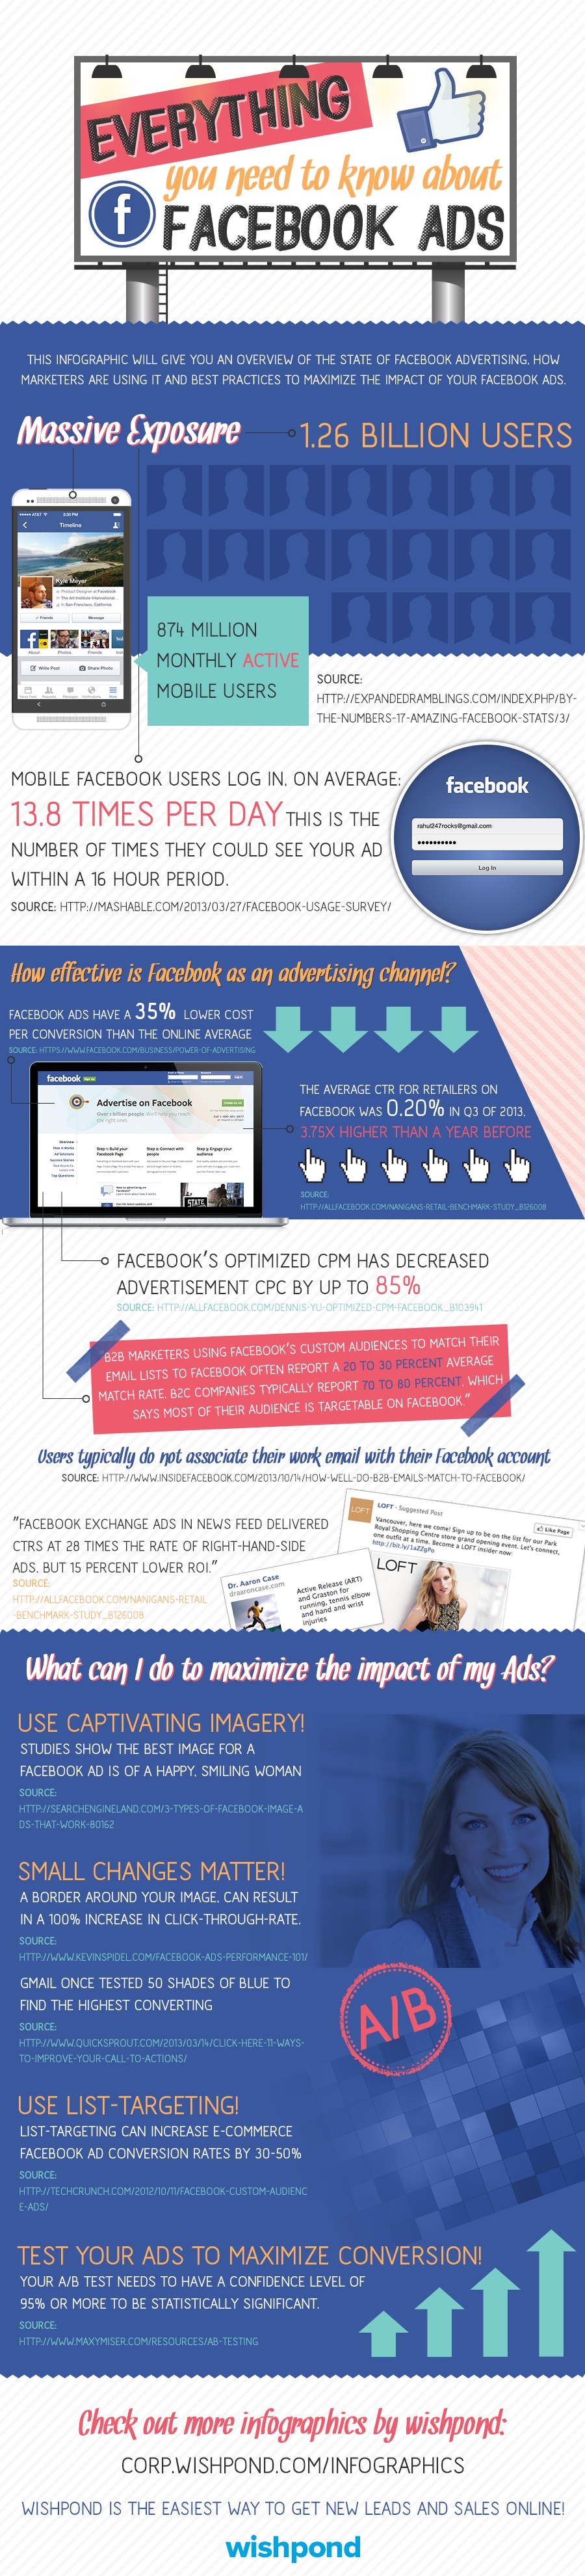 Infographic: Facebook advertising overview